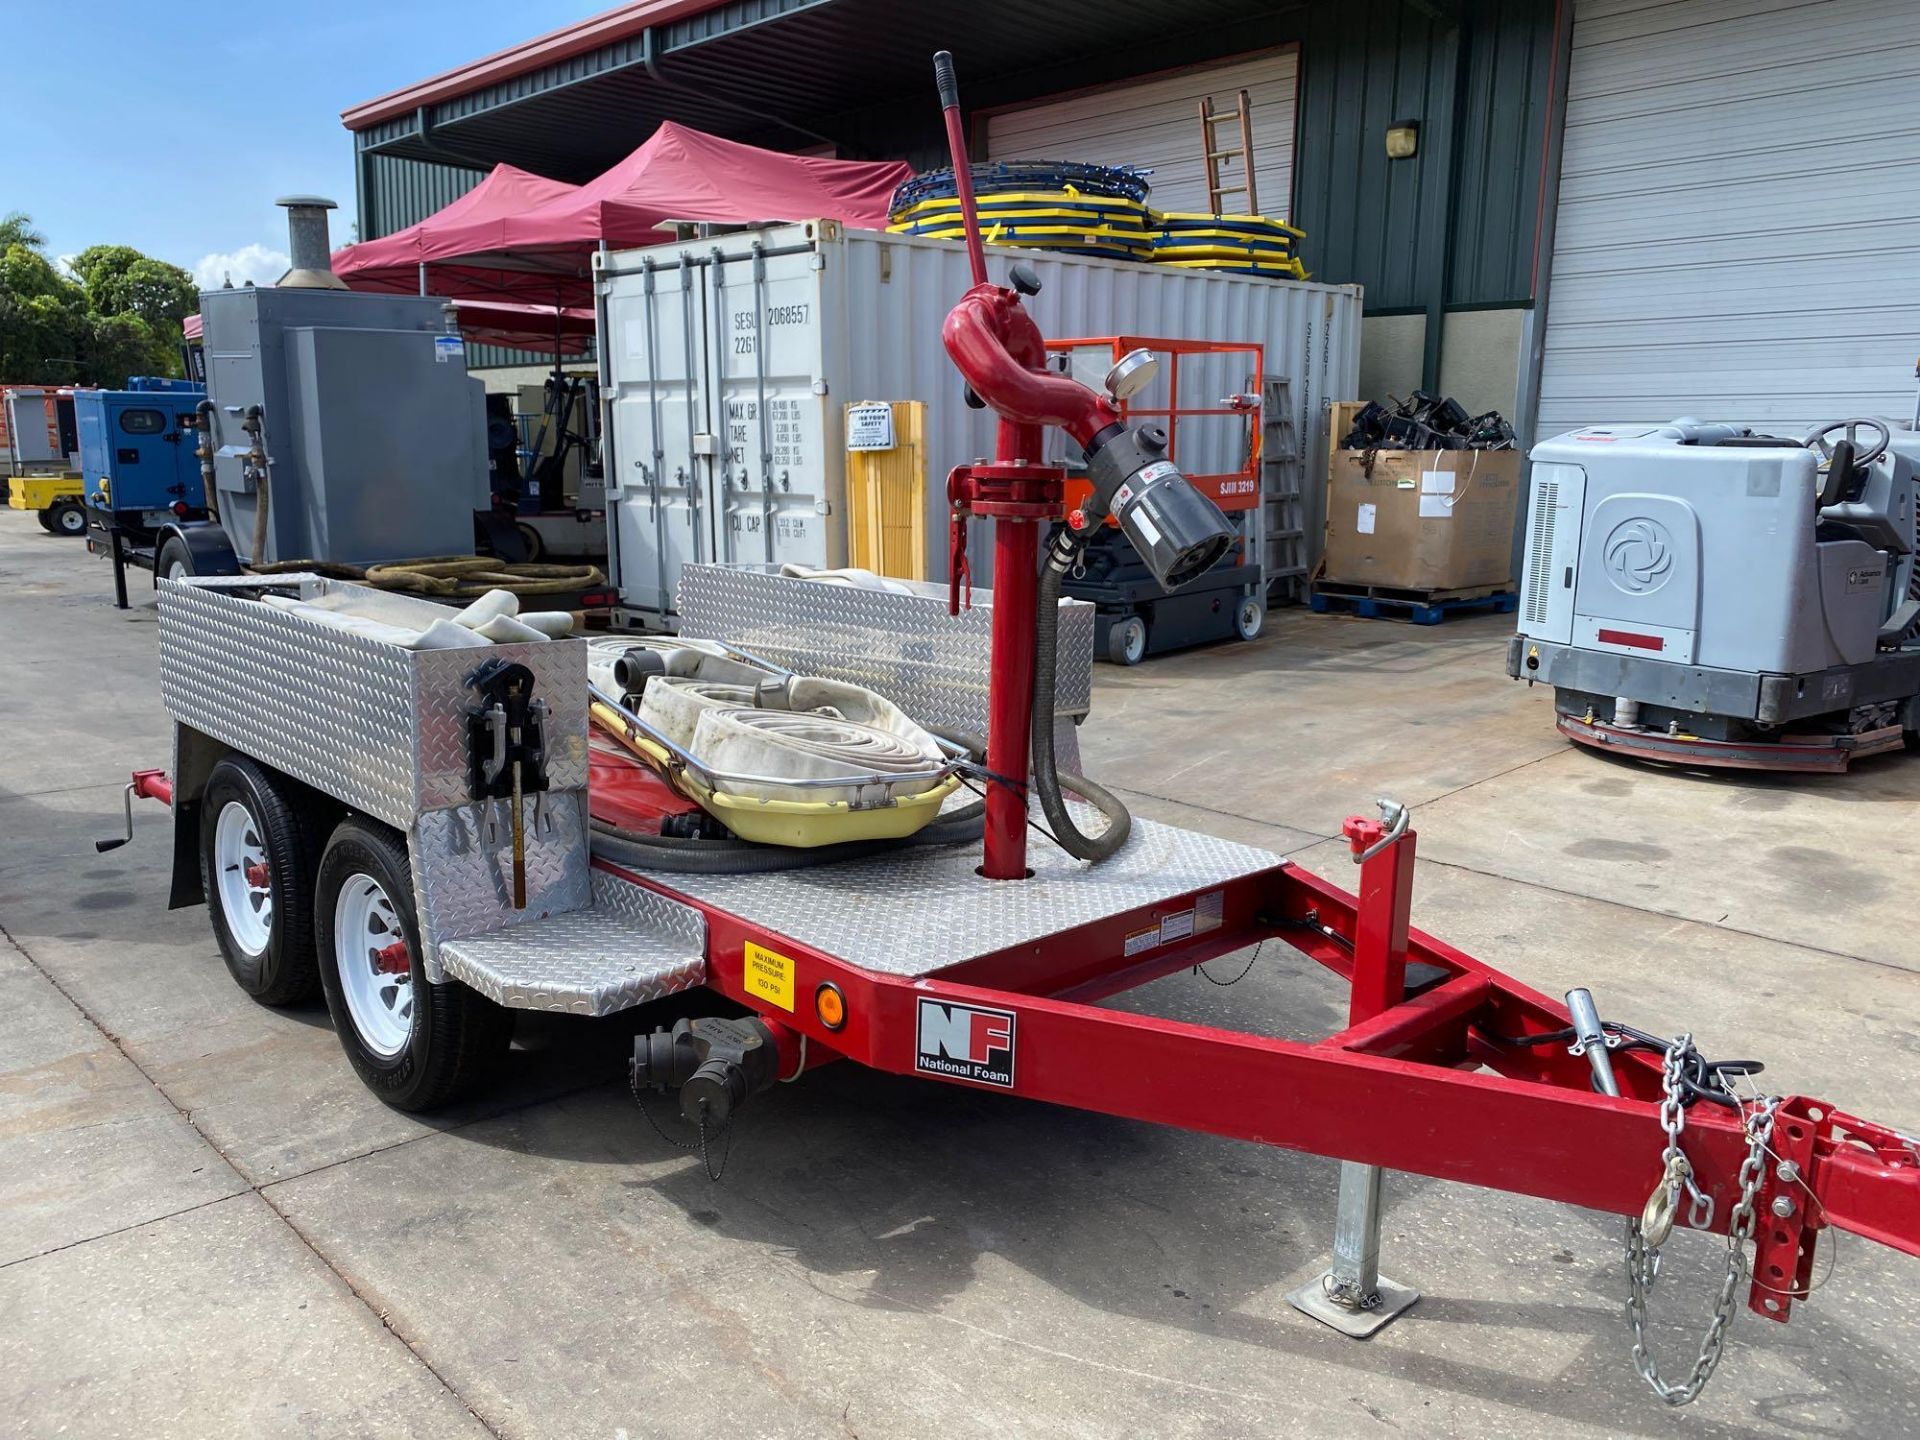 MGS INC. FIRE SUPPORT TRAILER WITH HOSES, STRETCHER, NATIONAL FOAM NOZZLE/ATTACHMENT - Image 5 of 28